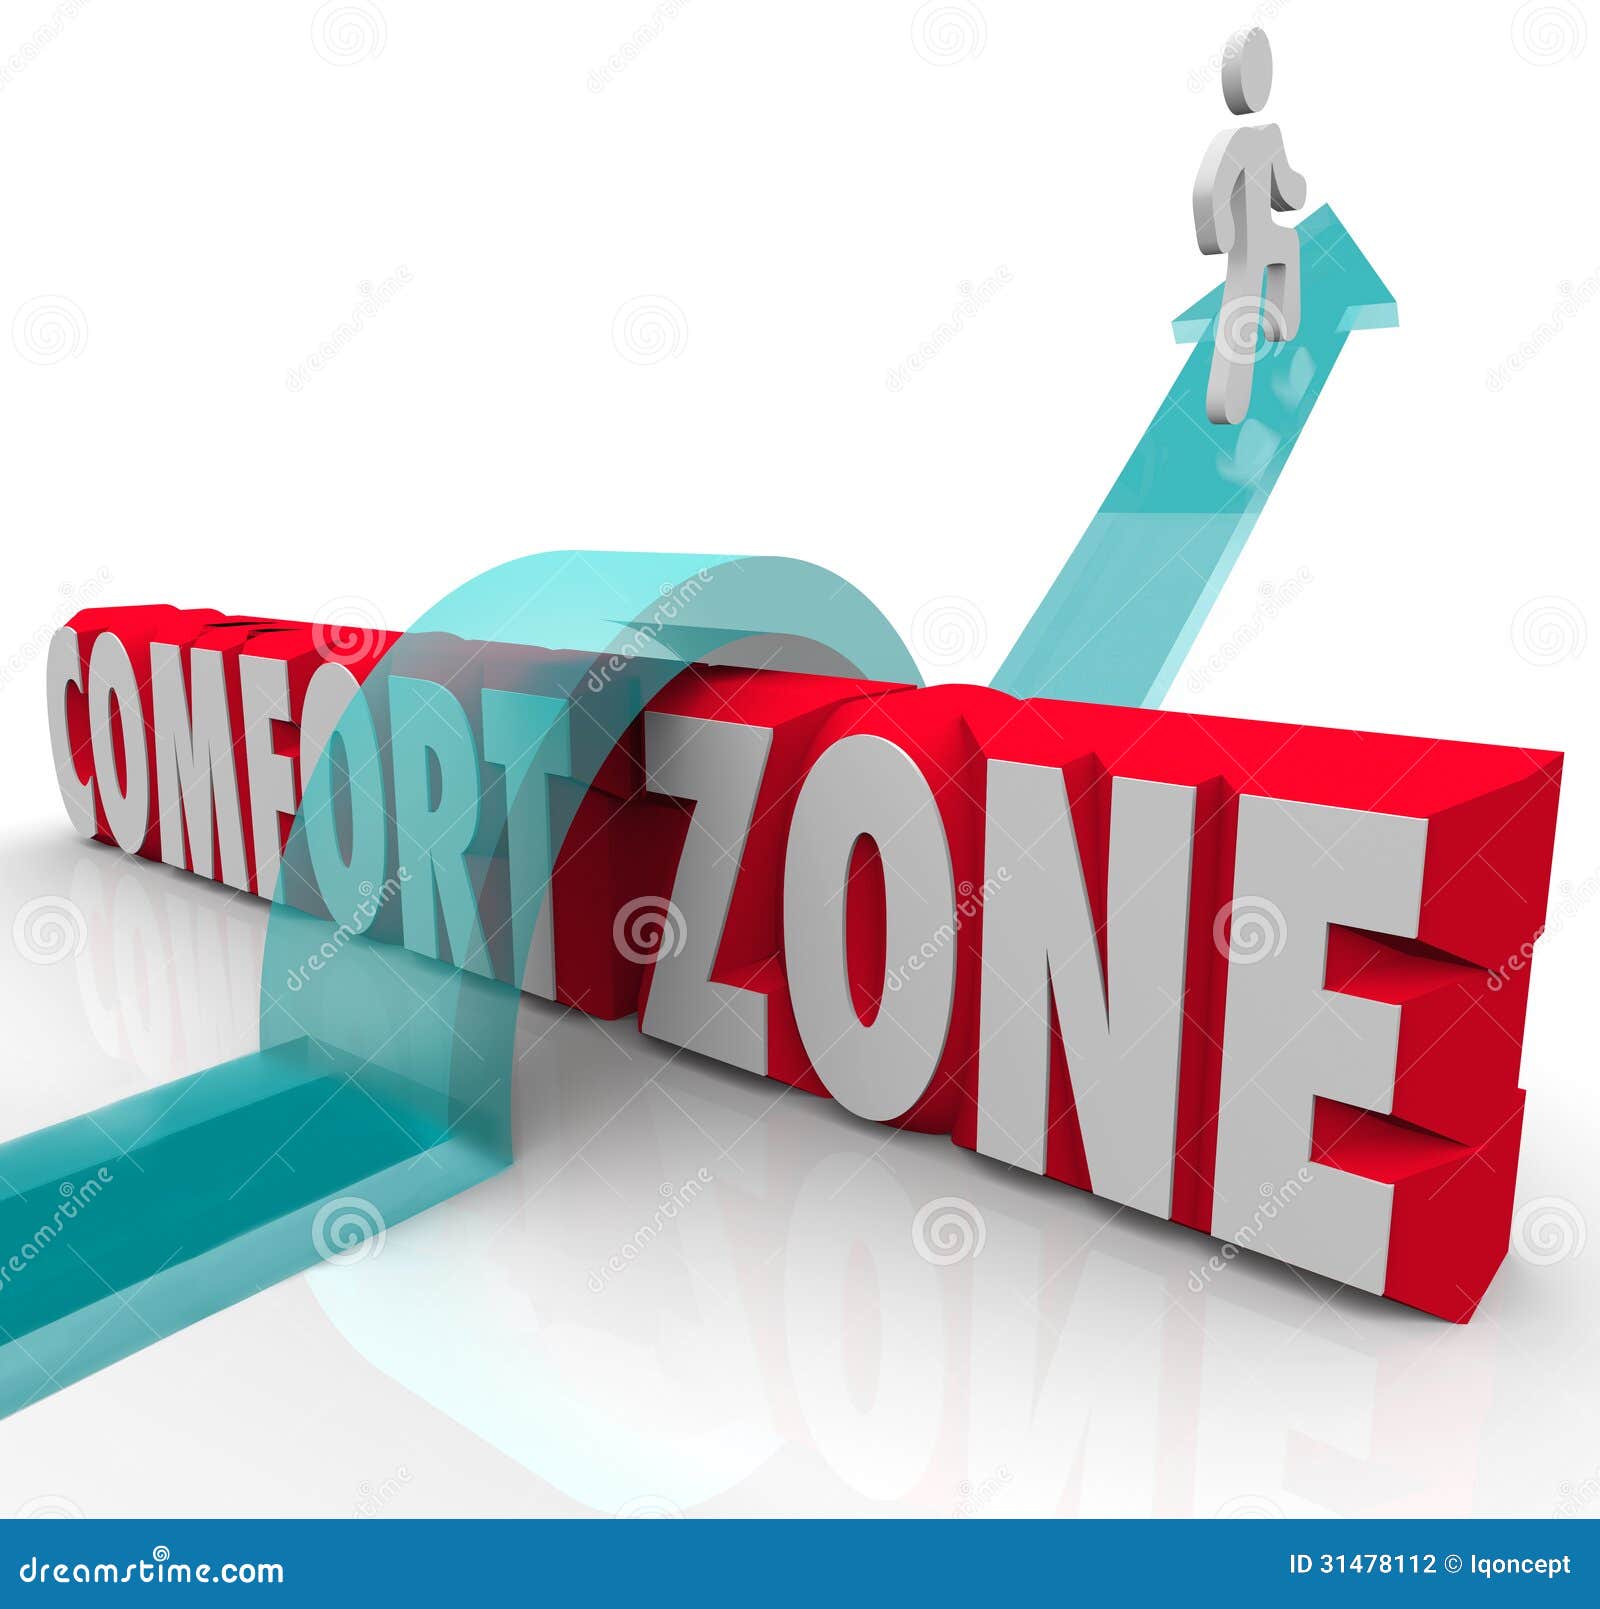 https://thumbs.dreamstime.com/z/going-outside-over-comfort-zone-try-different-experience-grow-person-jumps-beyond-to-gain-new-trying-things-31478112.jpg